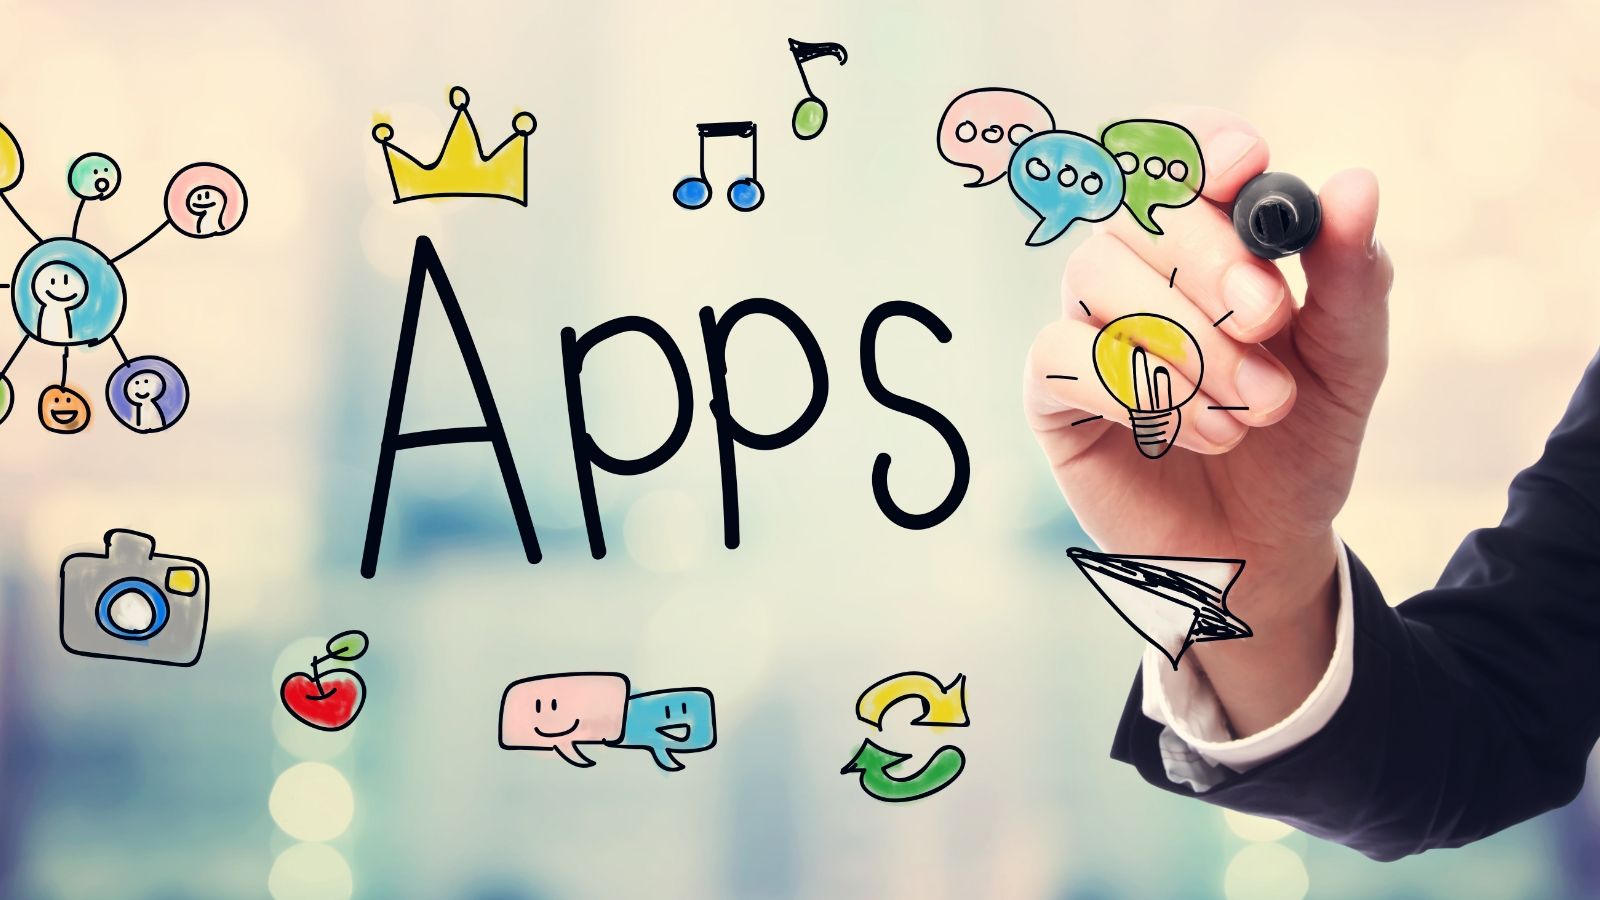 Apps, Web Apps, Mobile Apps, Native Apps, so many Apps!